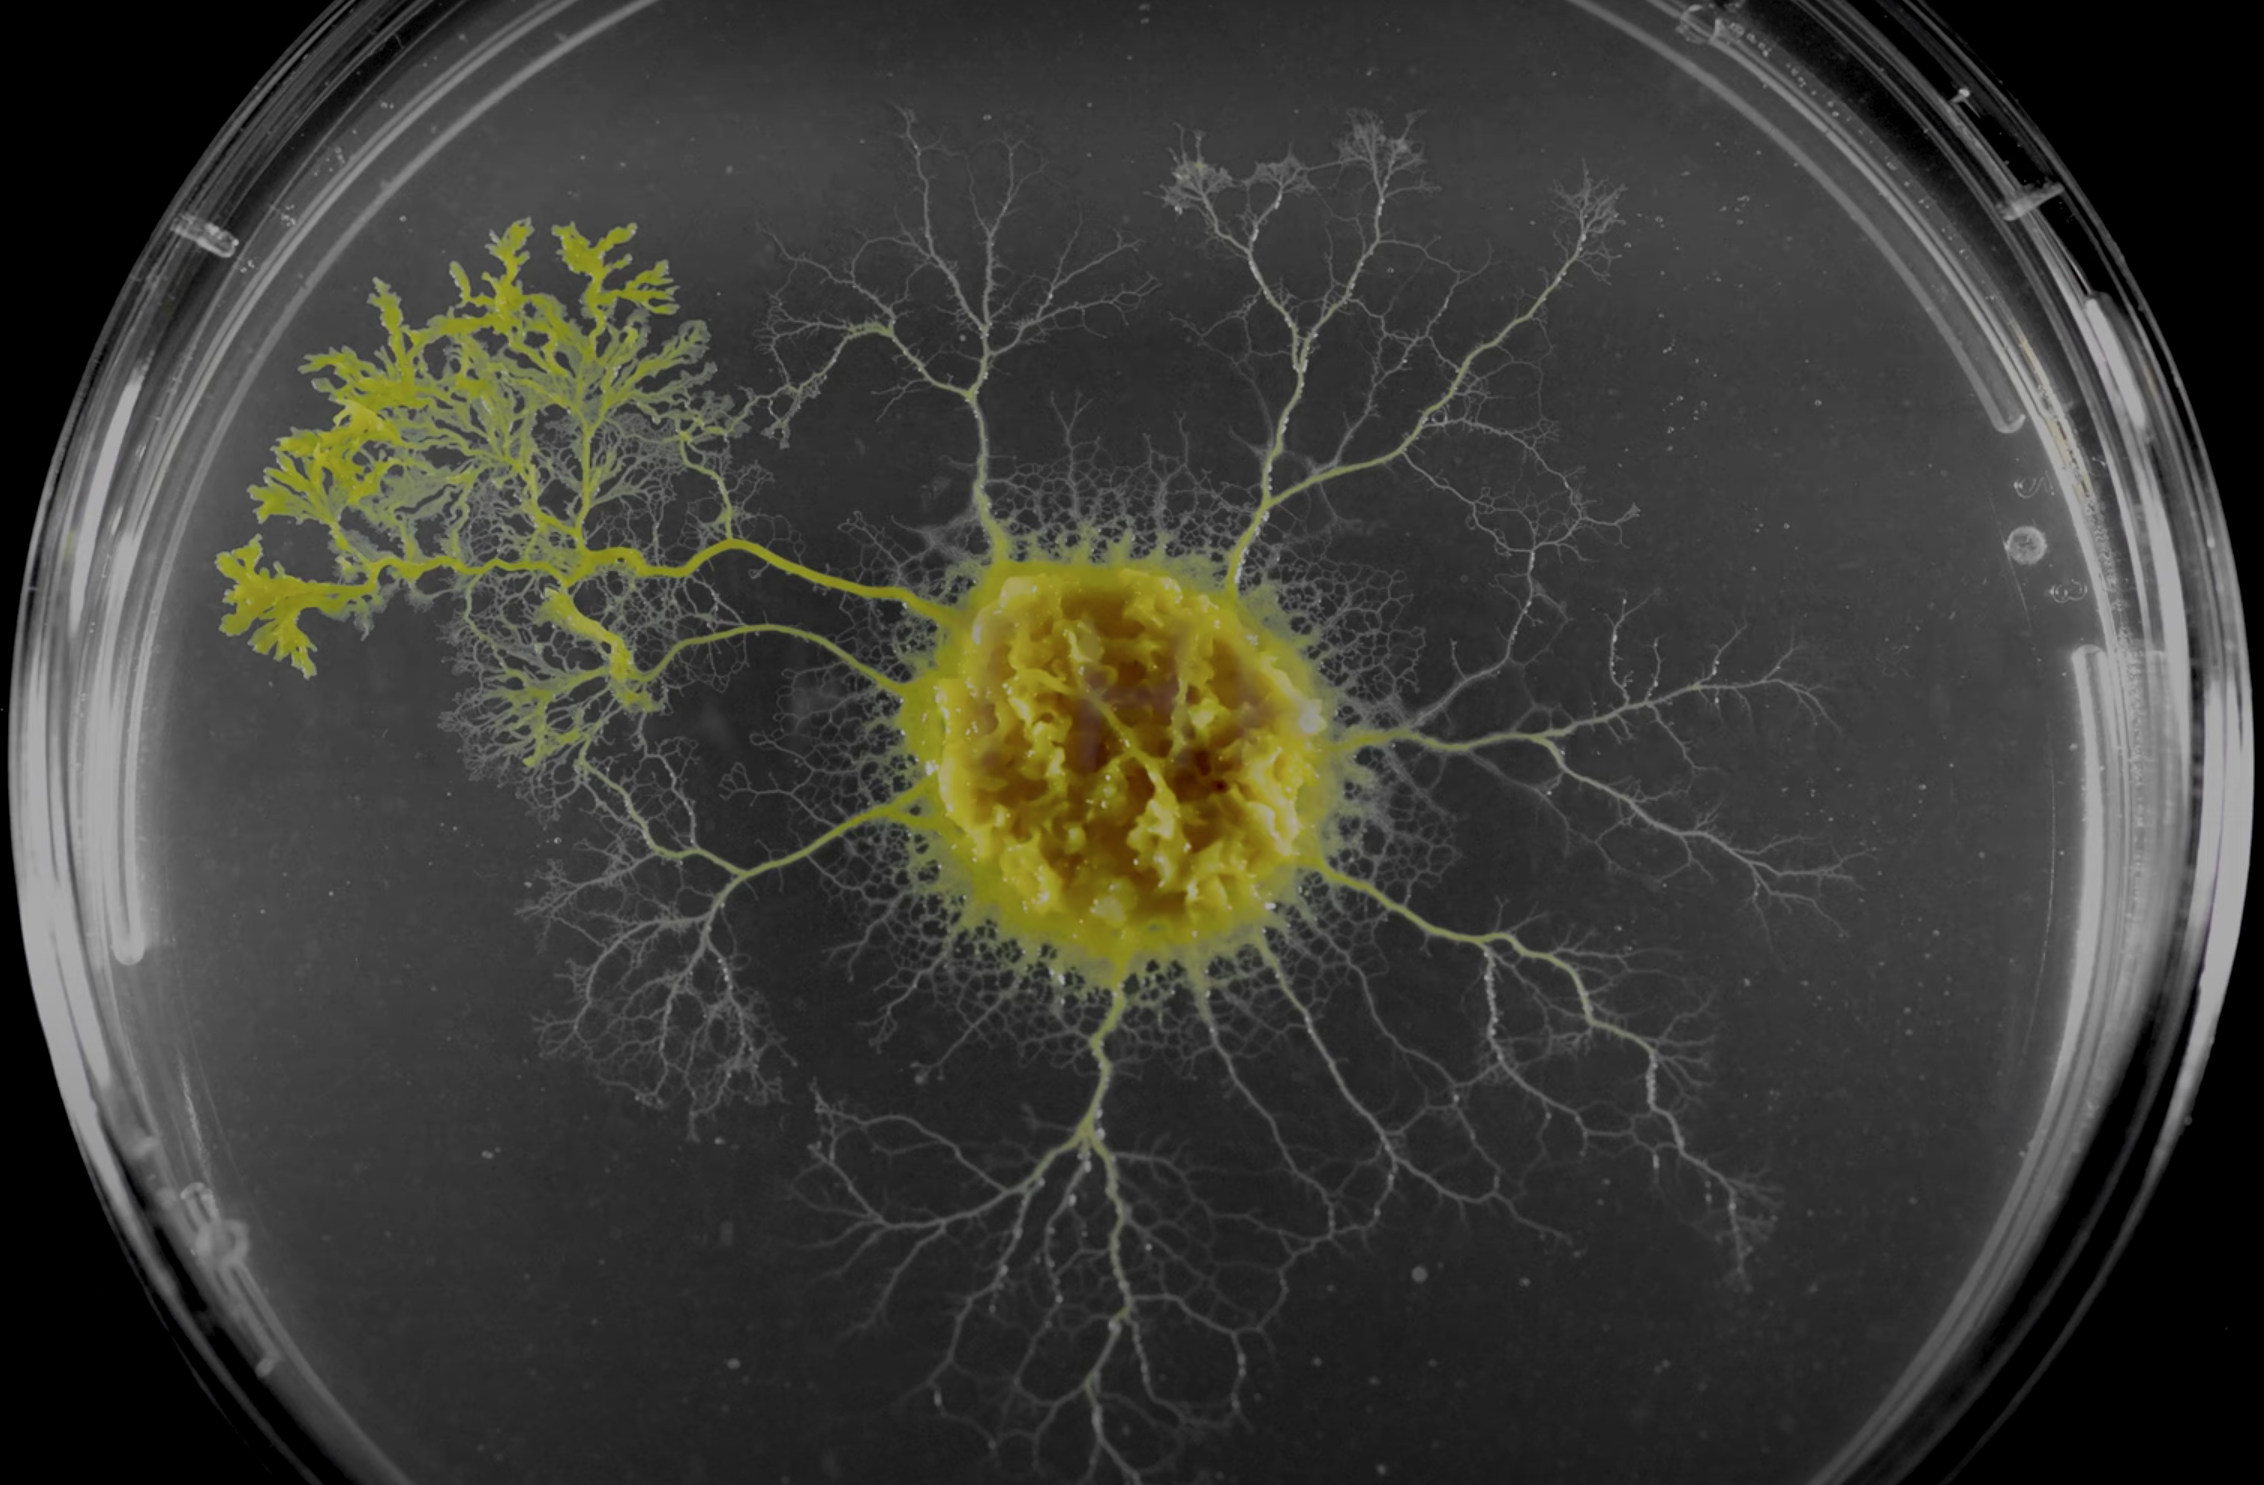 A slime mold in a petri dish